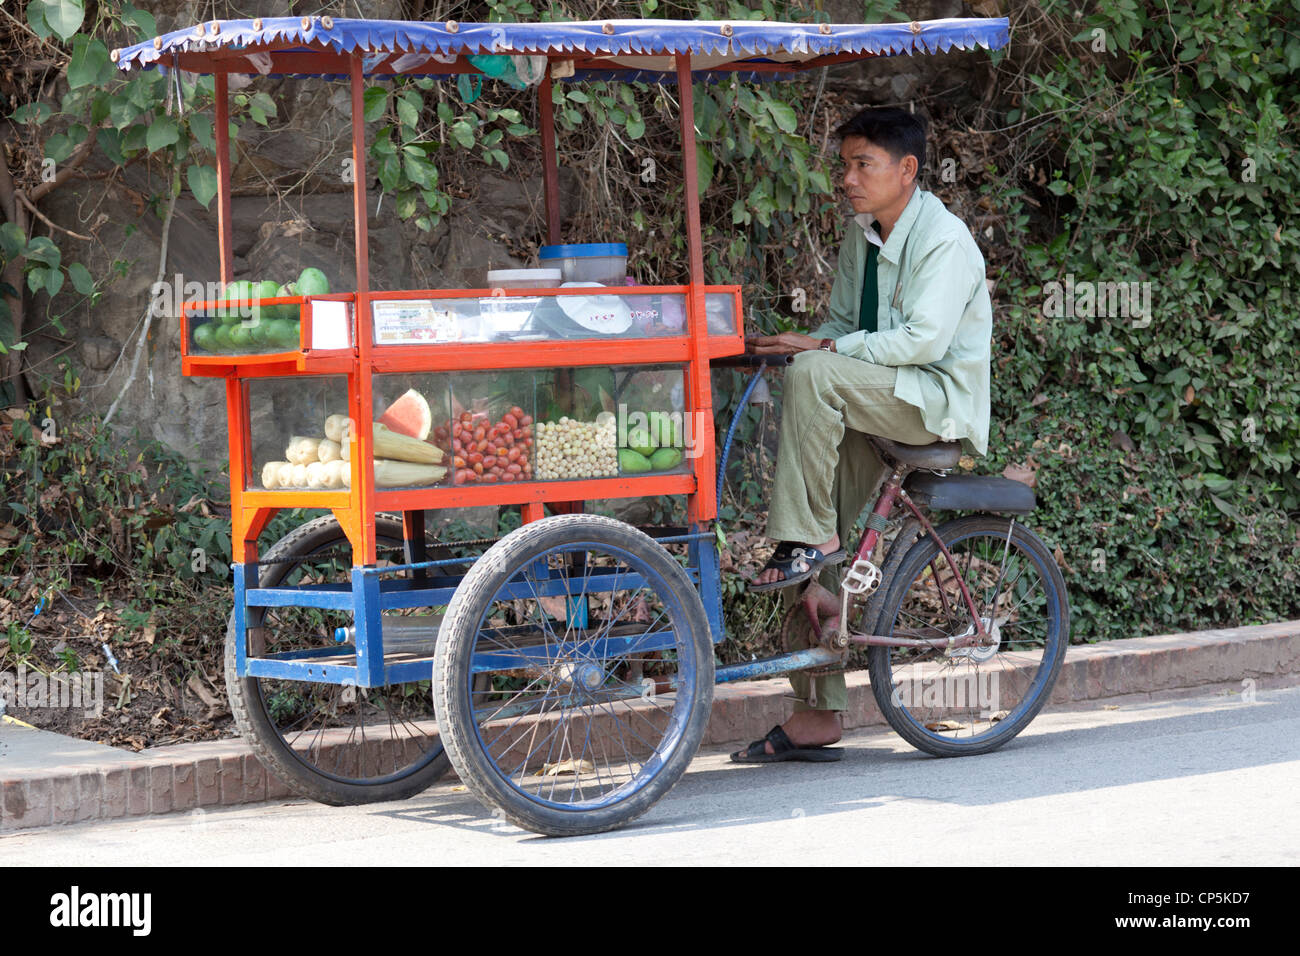 A street hawker waiting for customers with his mobile cart (Luang Prabang - Laos) Vendeur des rues attendant des clients (Laos). Stock Photo